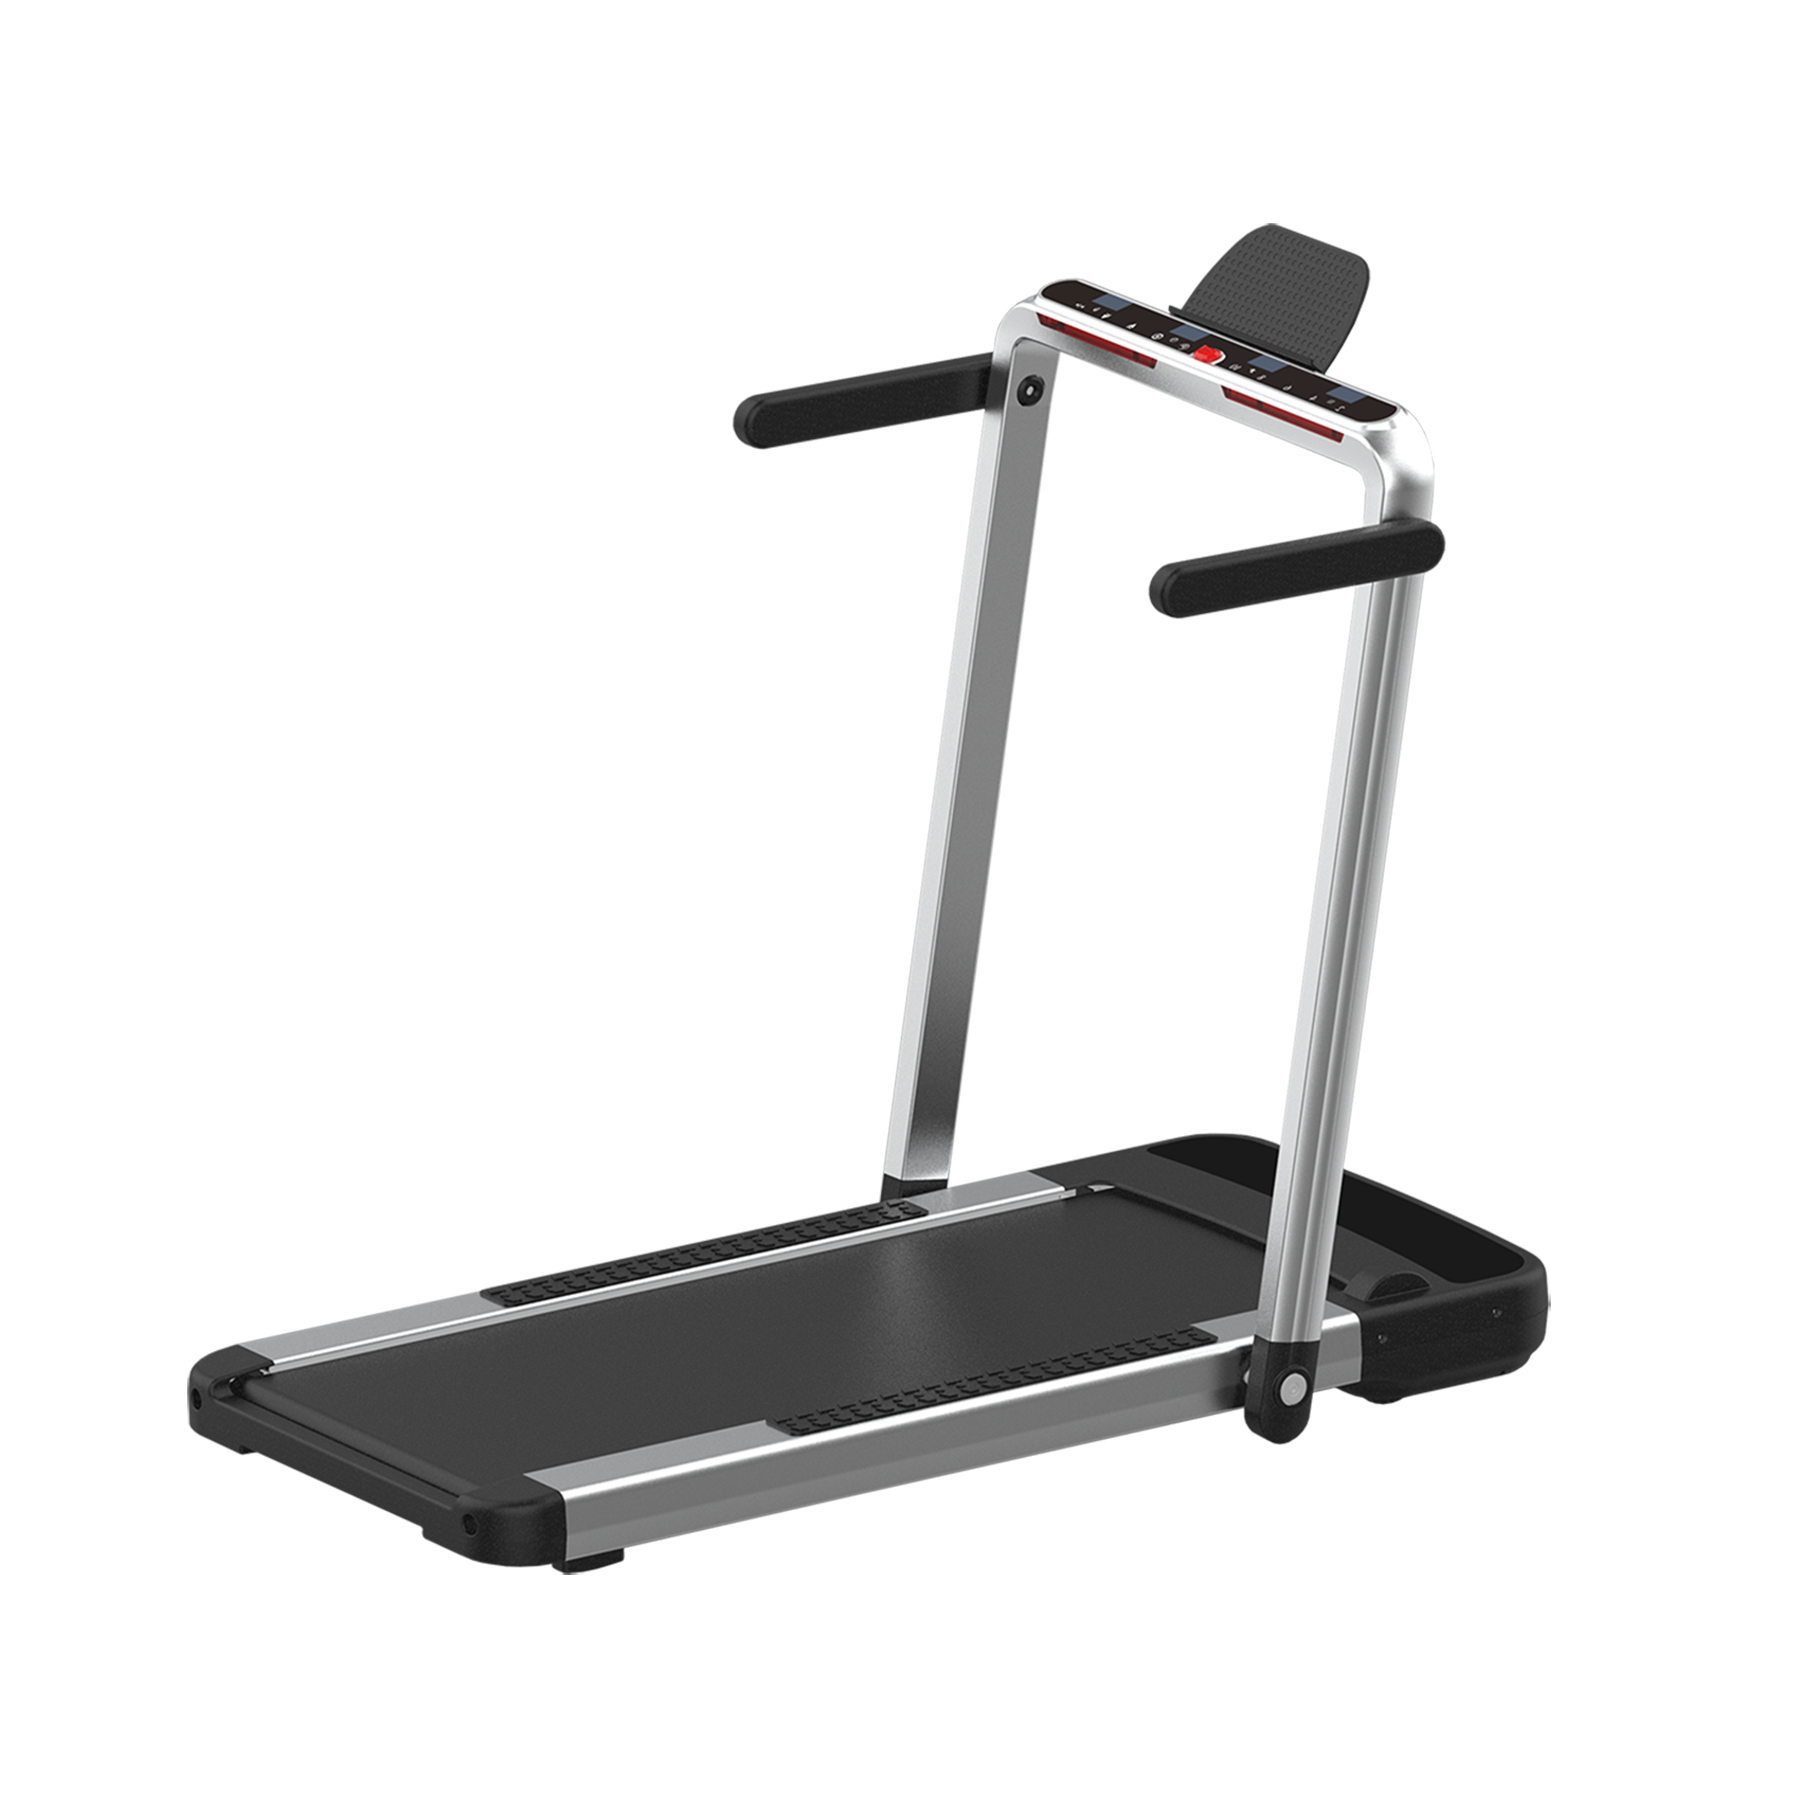 JF-H-40DC Home Use Motorized Treadmill